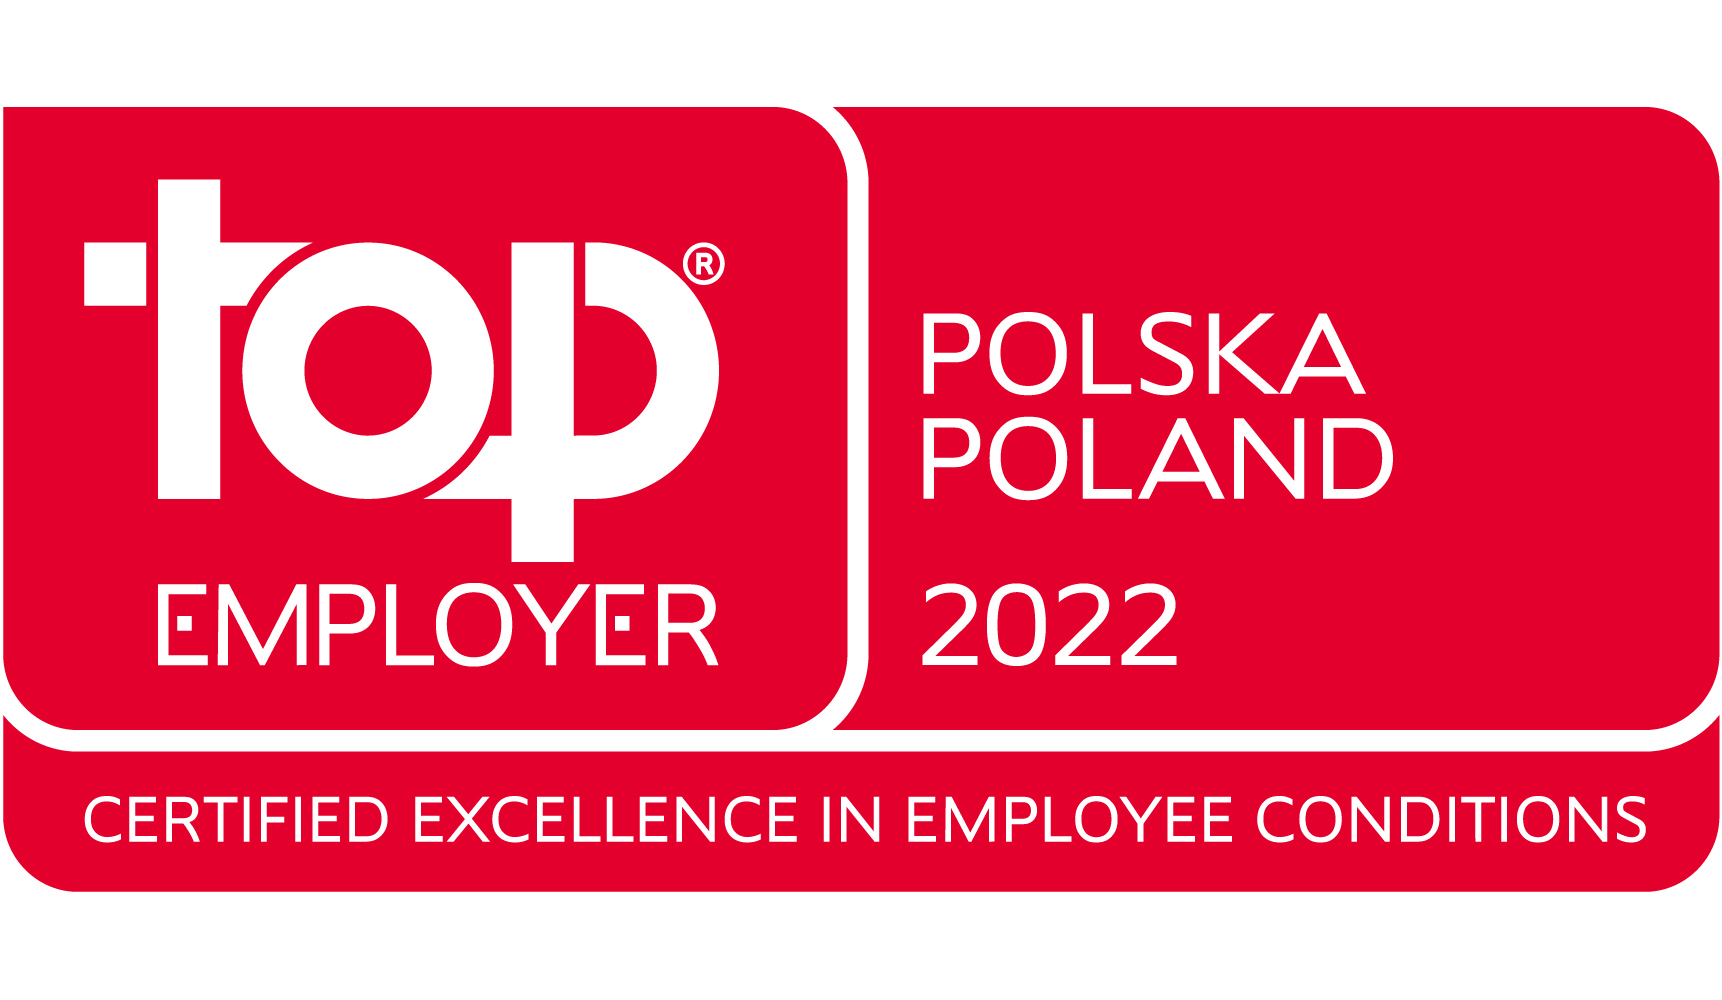 Clariant Image Top Employer Poland 2022 20220125